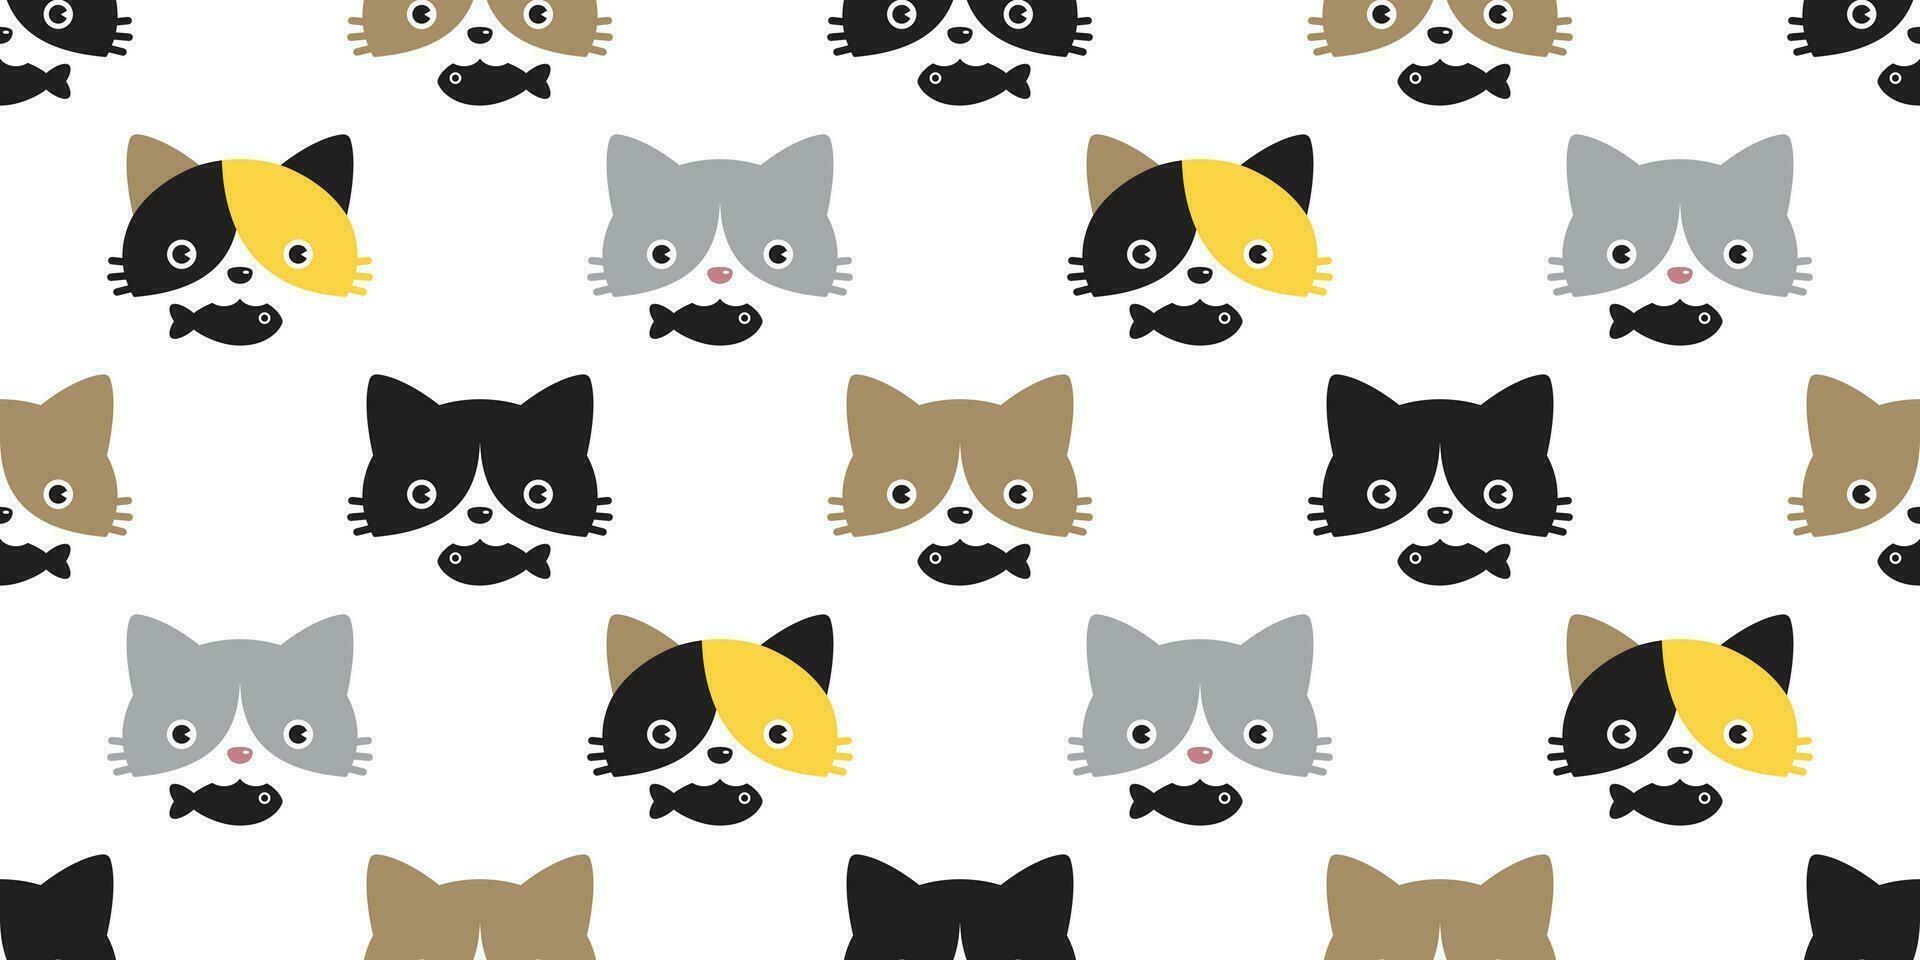 cat seamless pattern vector calico fish head black kitten pet repeat wallpaper cartoon tile background scarf isolated illustration